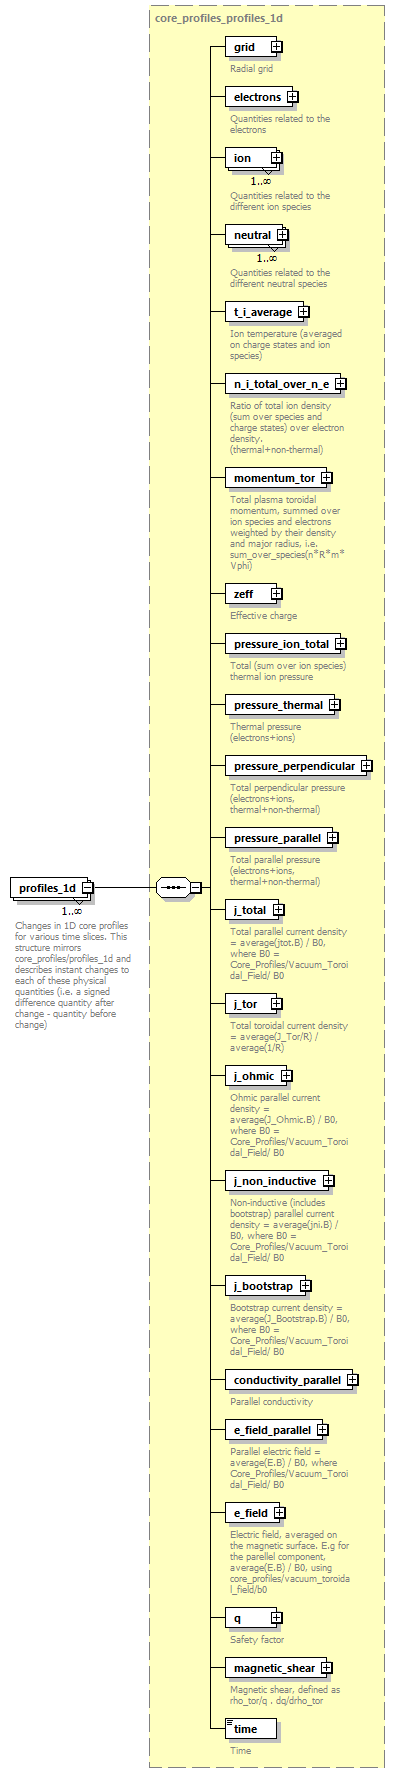 dd_physics_data_dictionary_p651.png